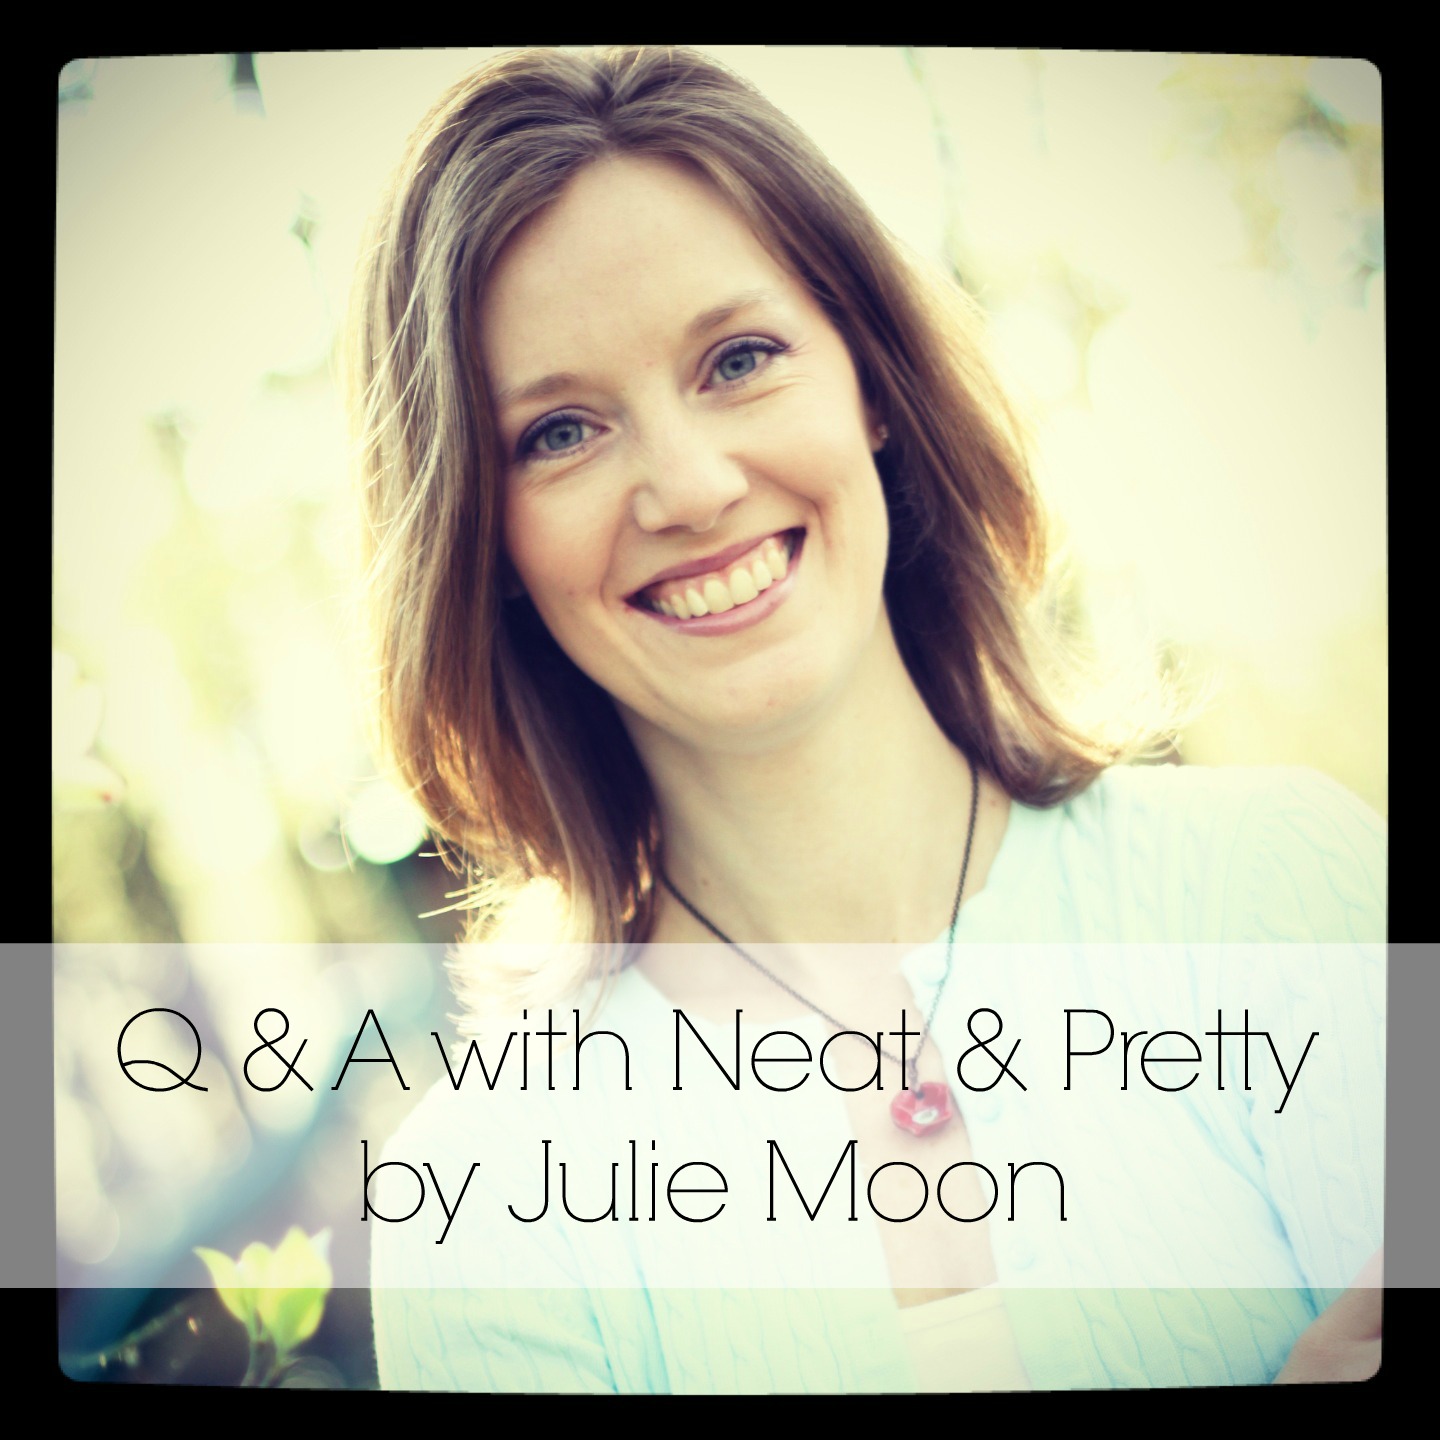 Q & A with Neat & Pretty